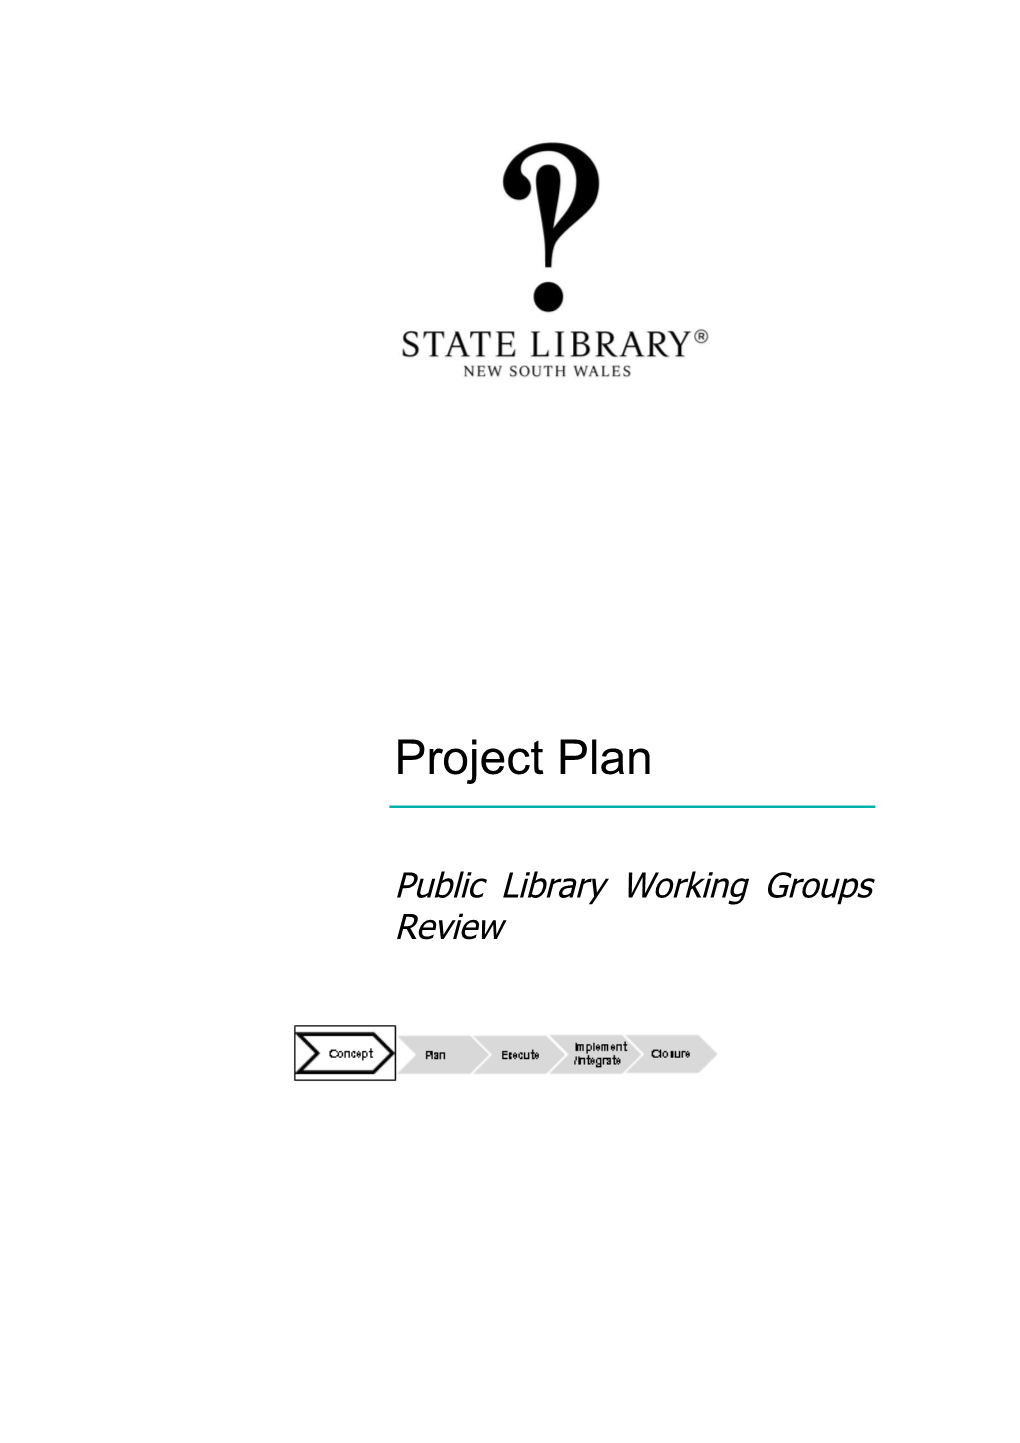 Public Library Working Groups Review